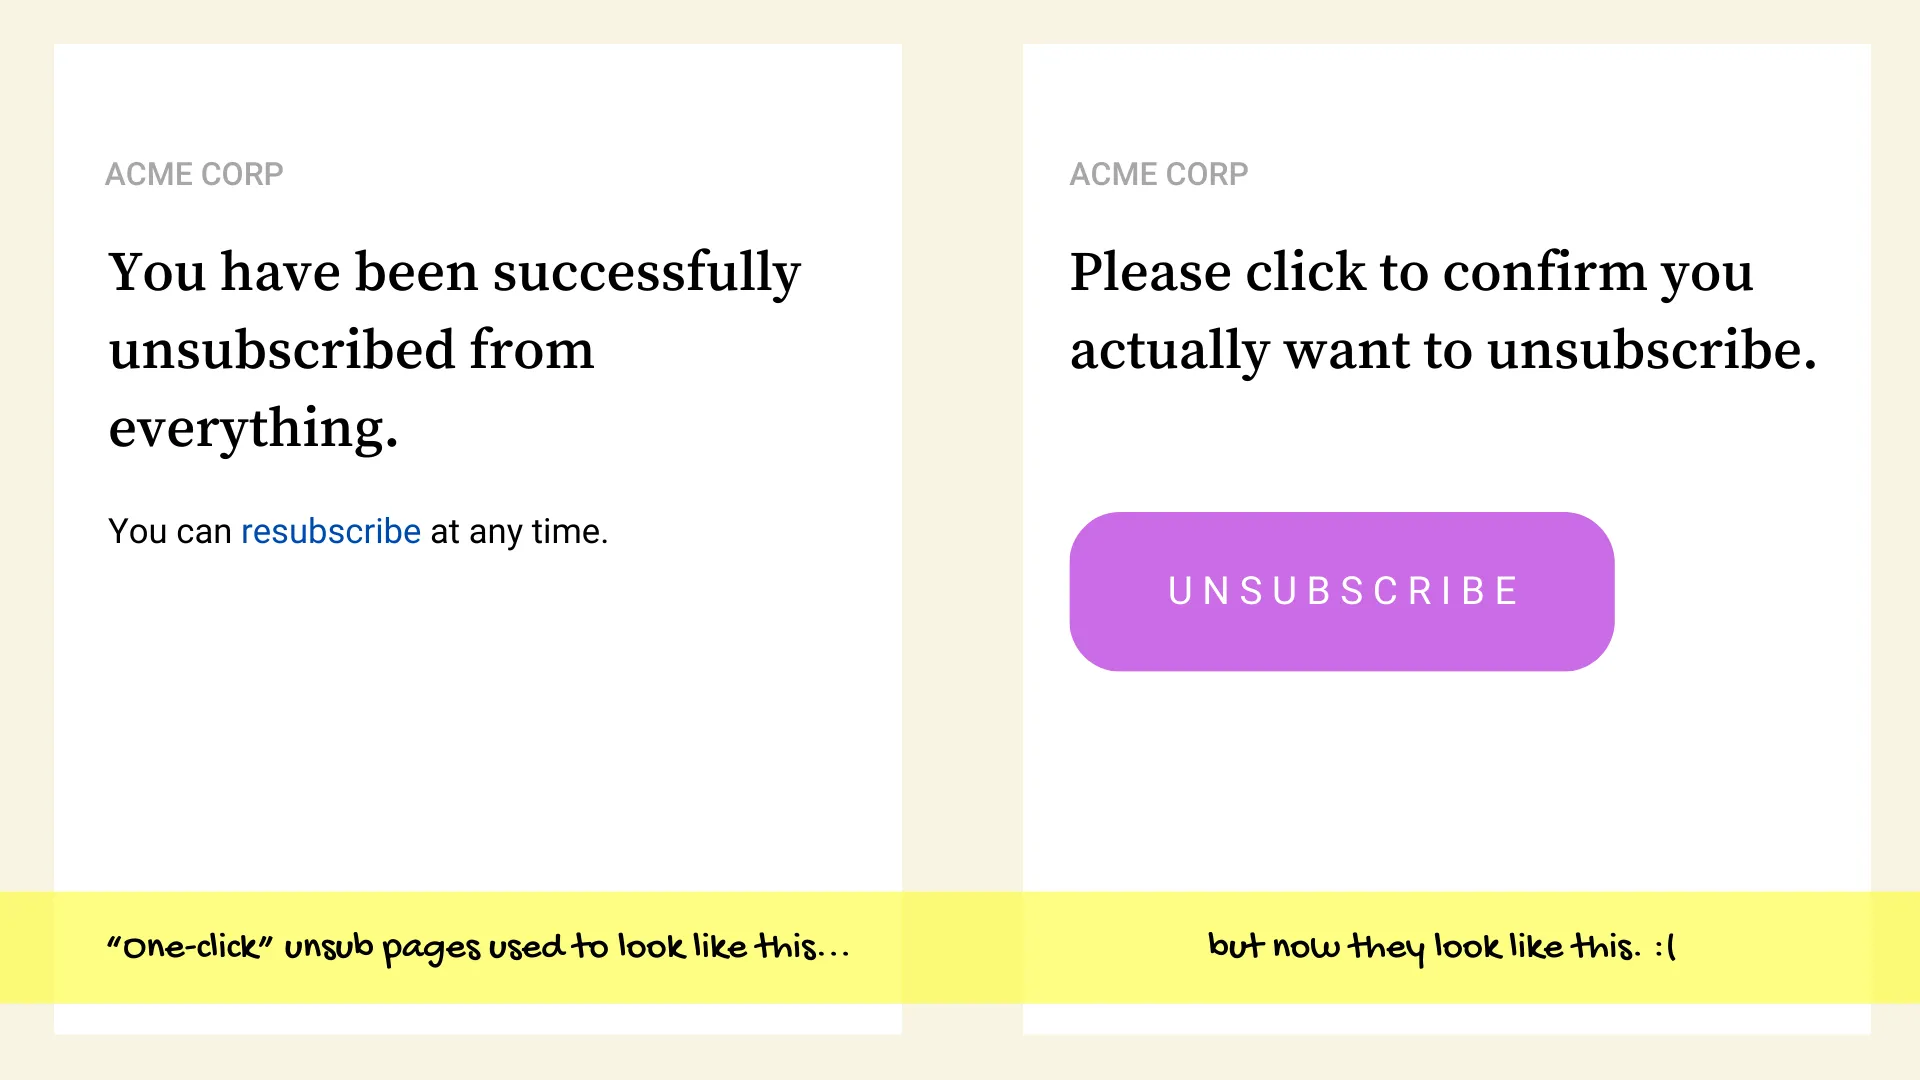 The one-click unsub is now two-clicks